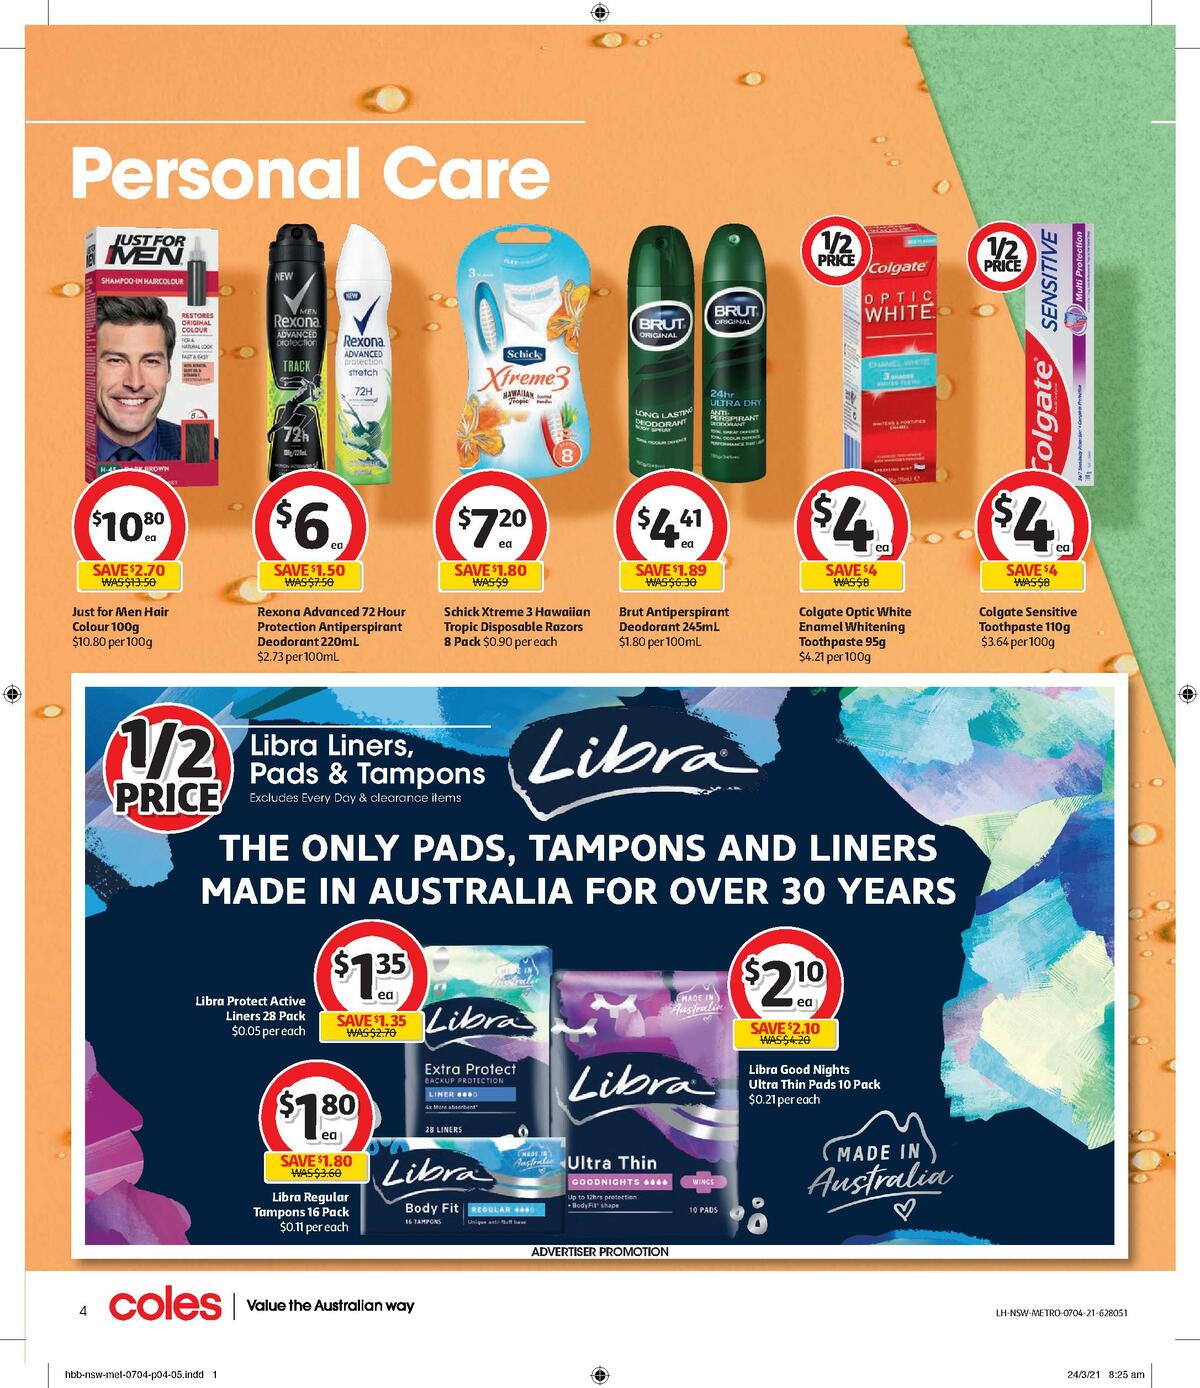 Coles Health & Beauty Catalogues from 7 April